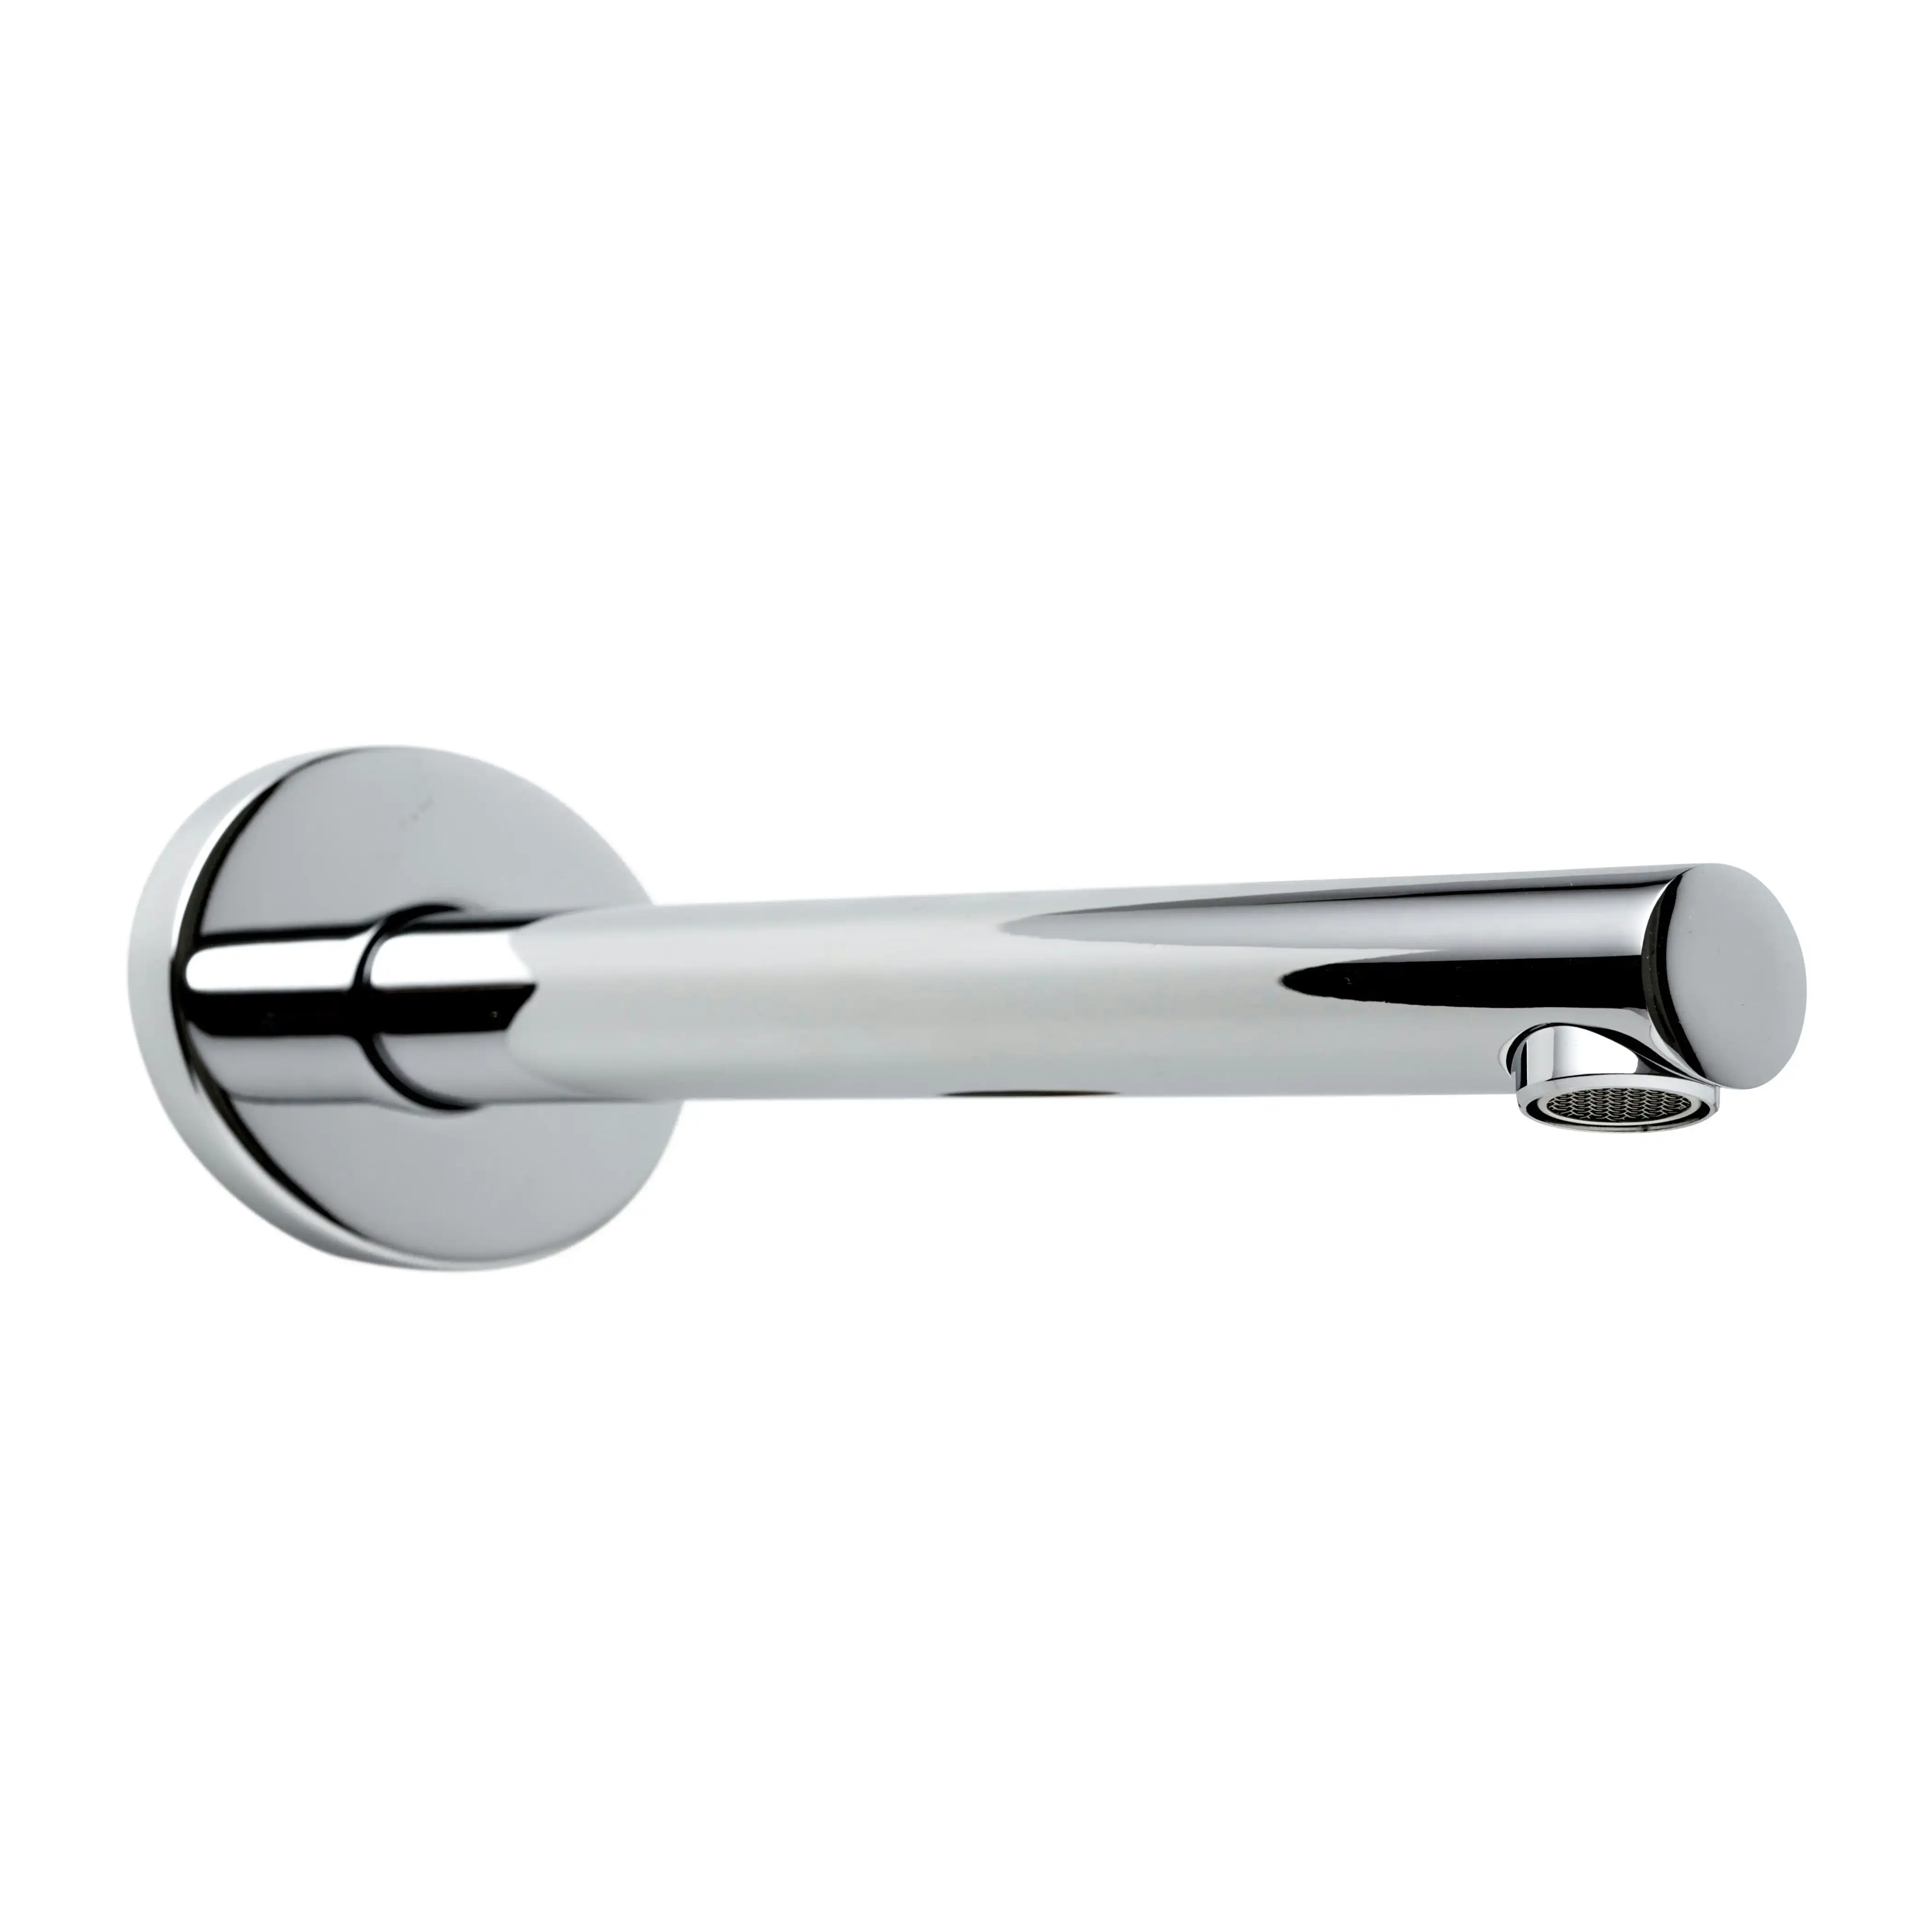 Vale Molla Wall Mounted Round Bath Spout - Chrome